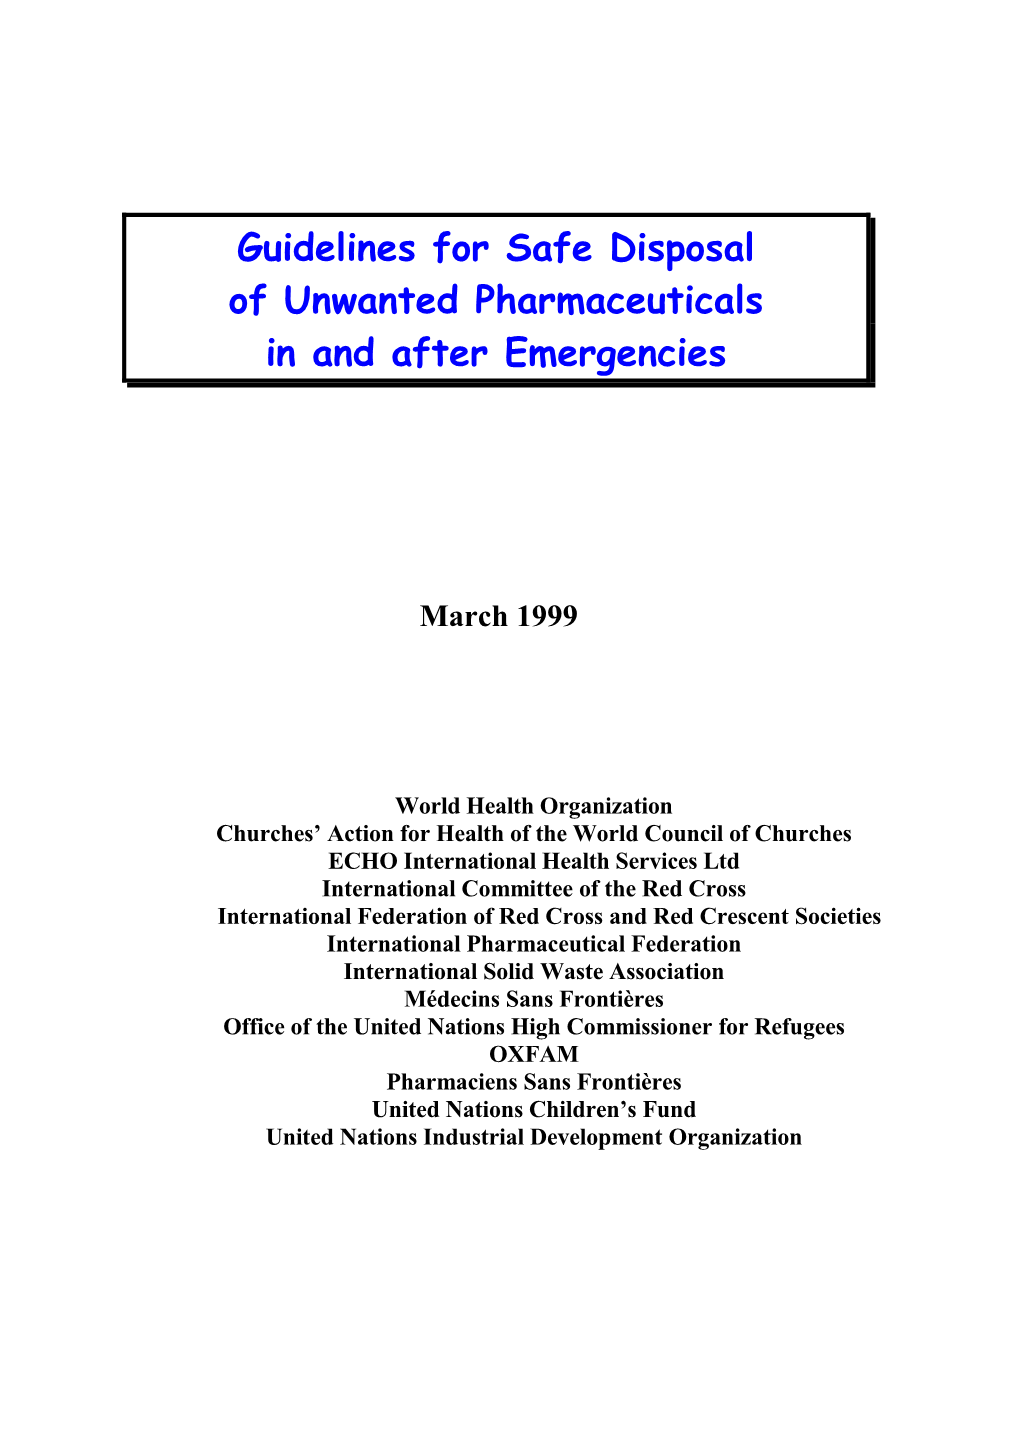 Guidelines for Safe Disposal of Unwanted Pharmaceuticals in and After Emergencies